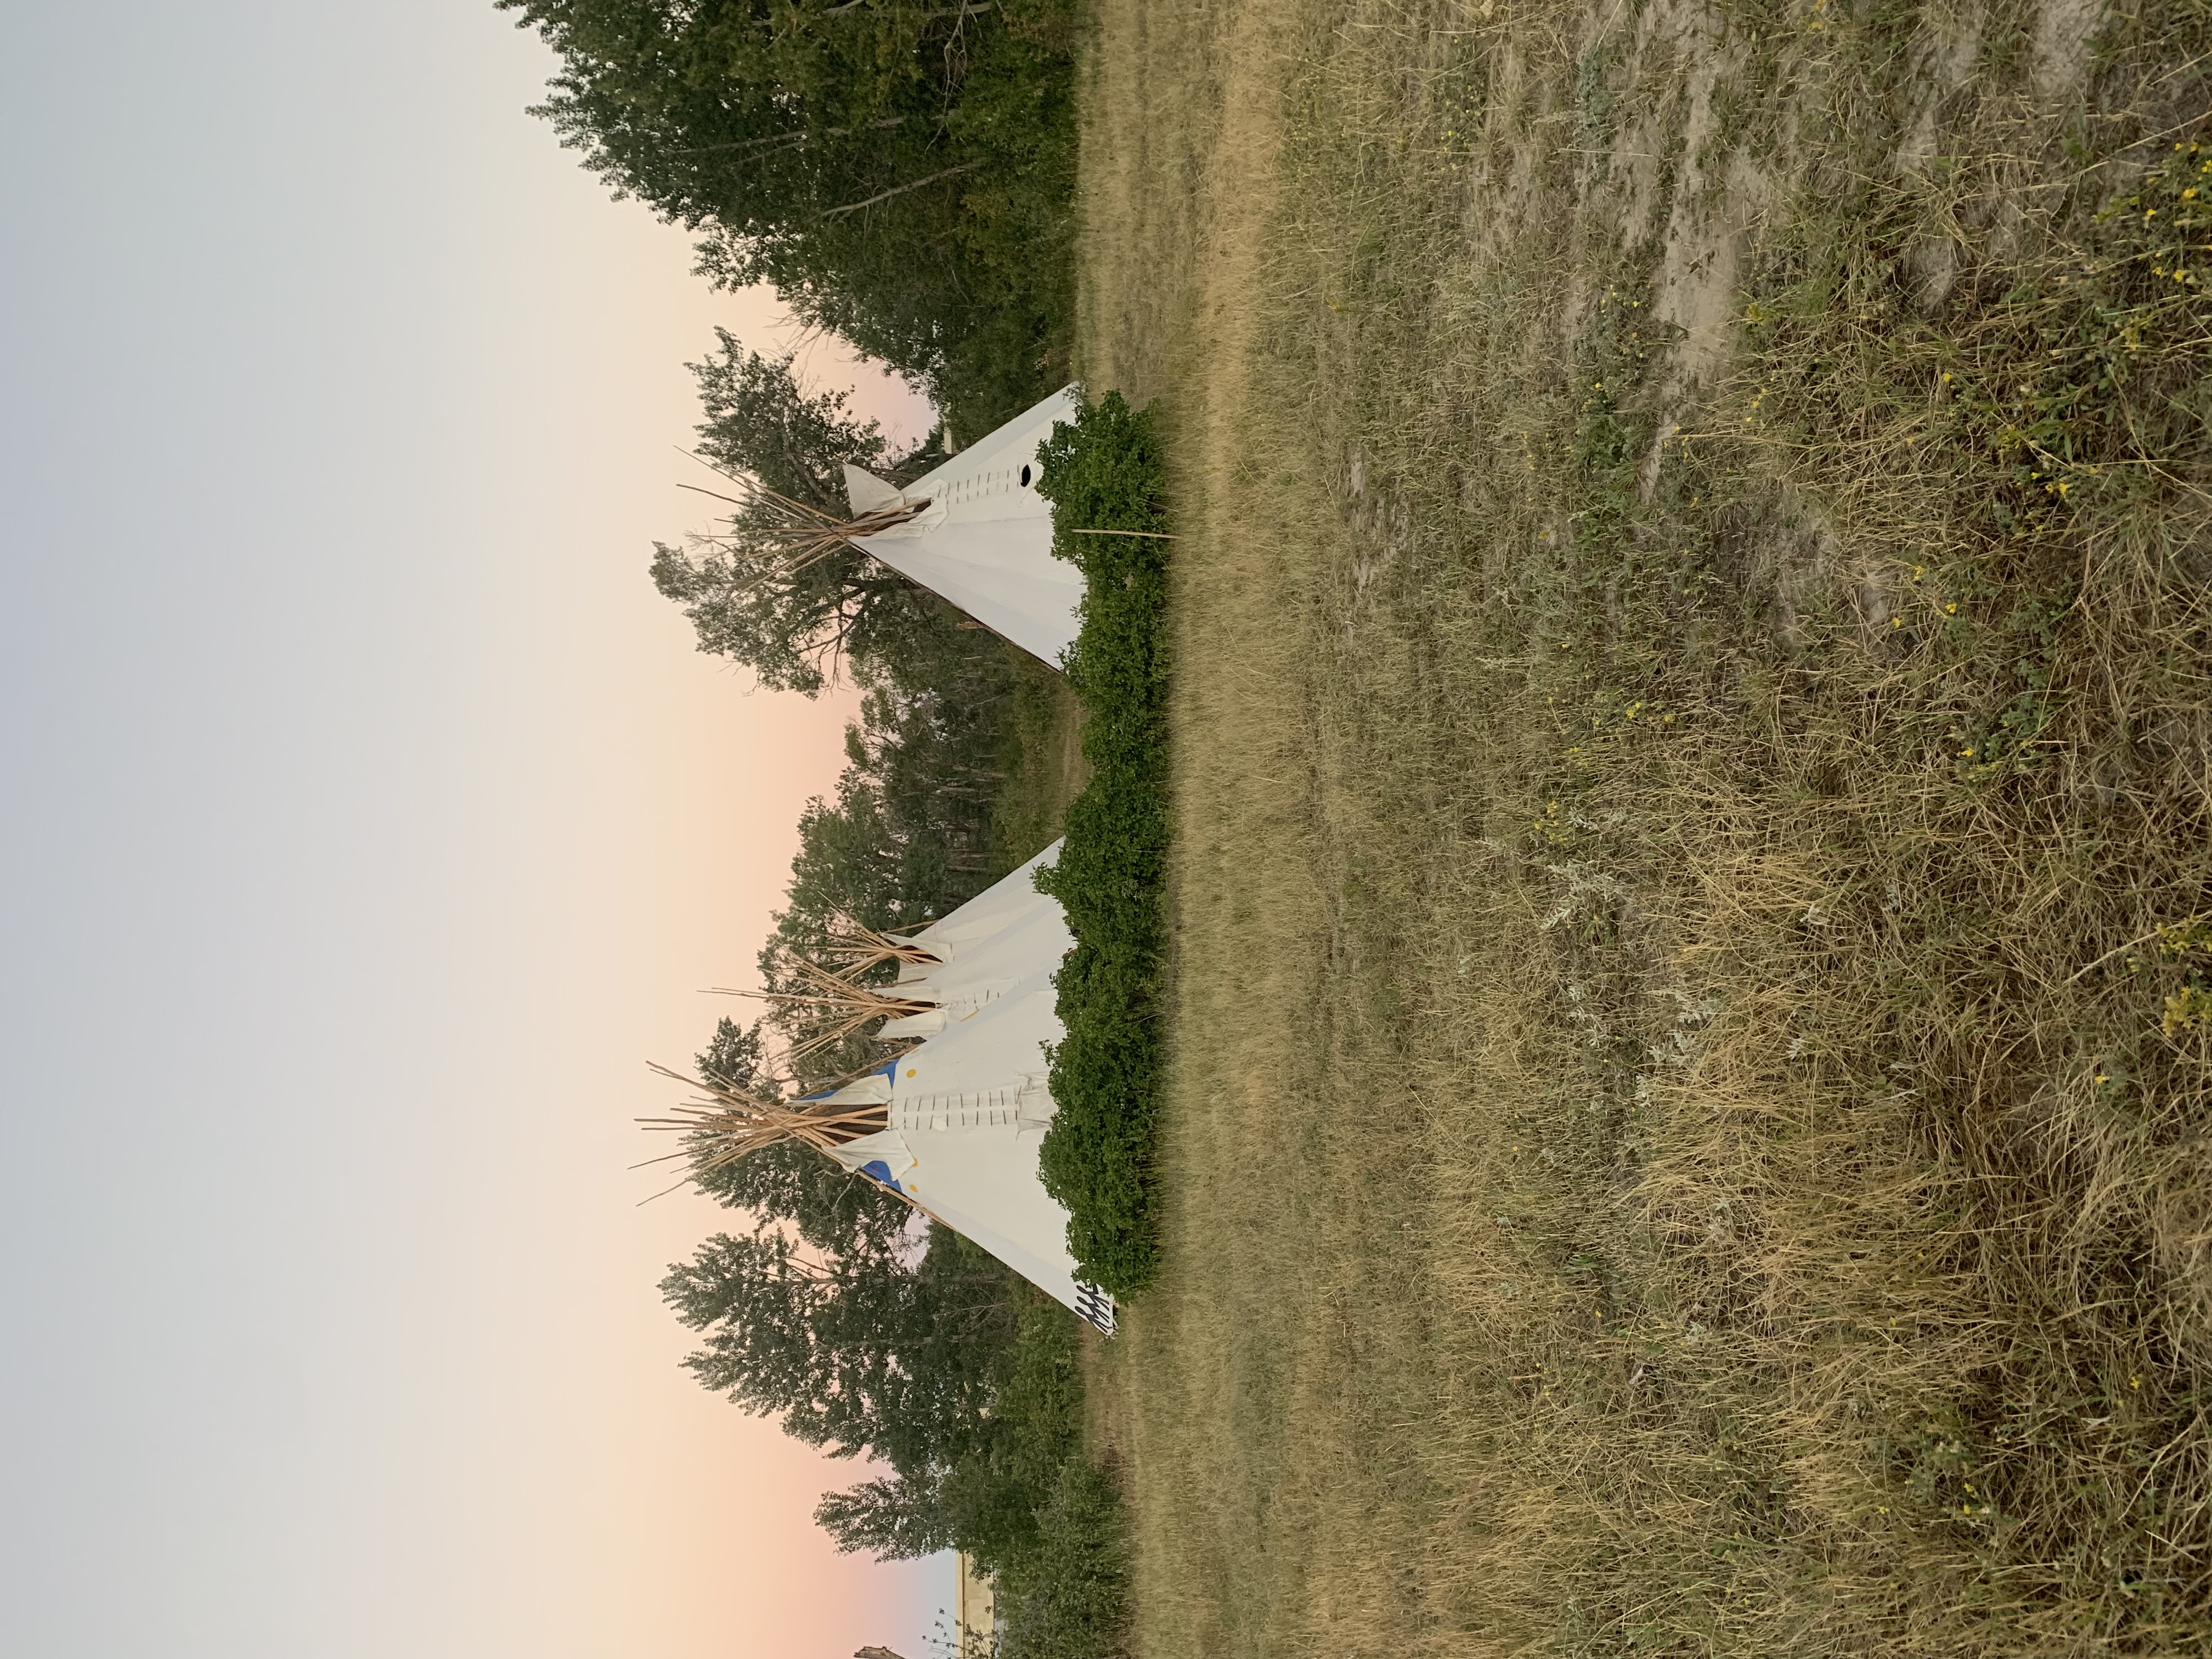 A small collection of tipis in the midground in the early morning light.